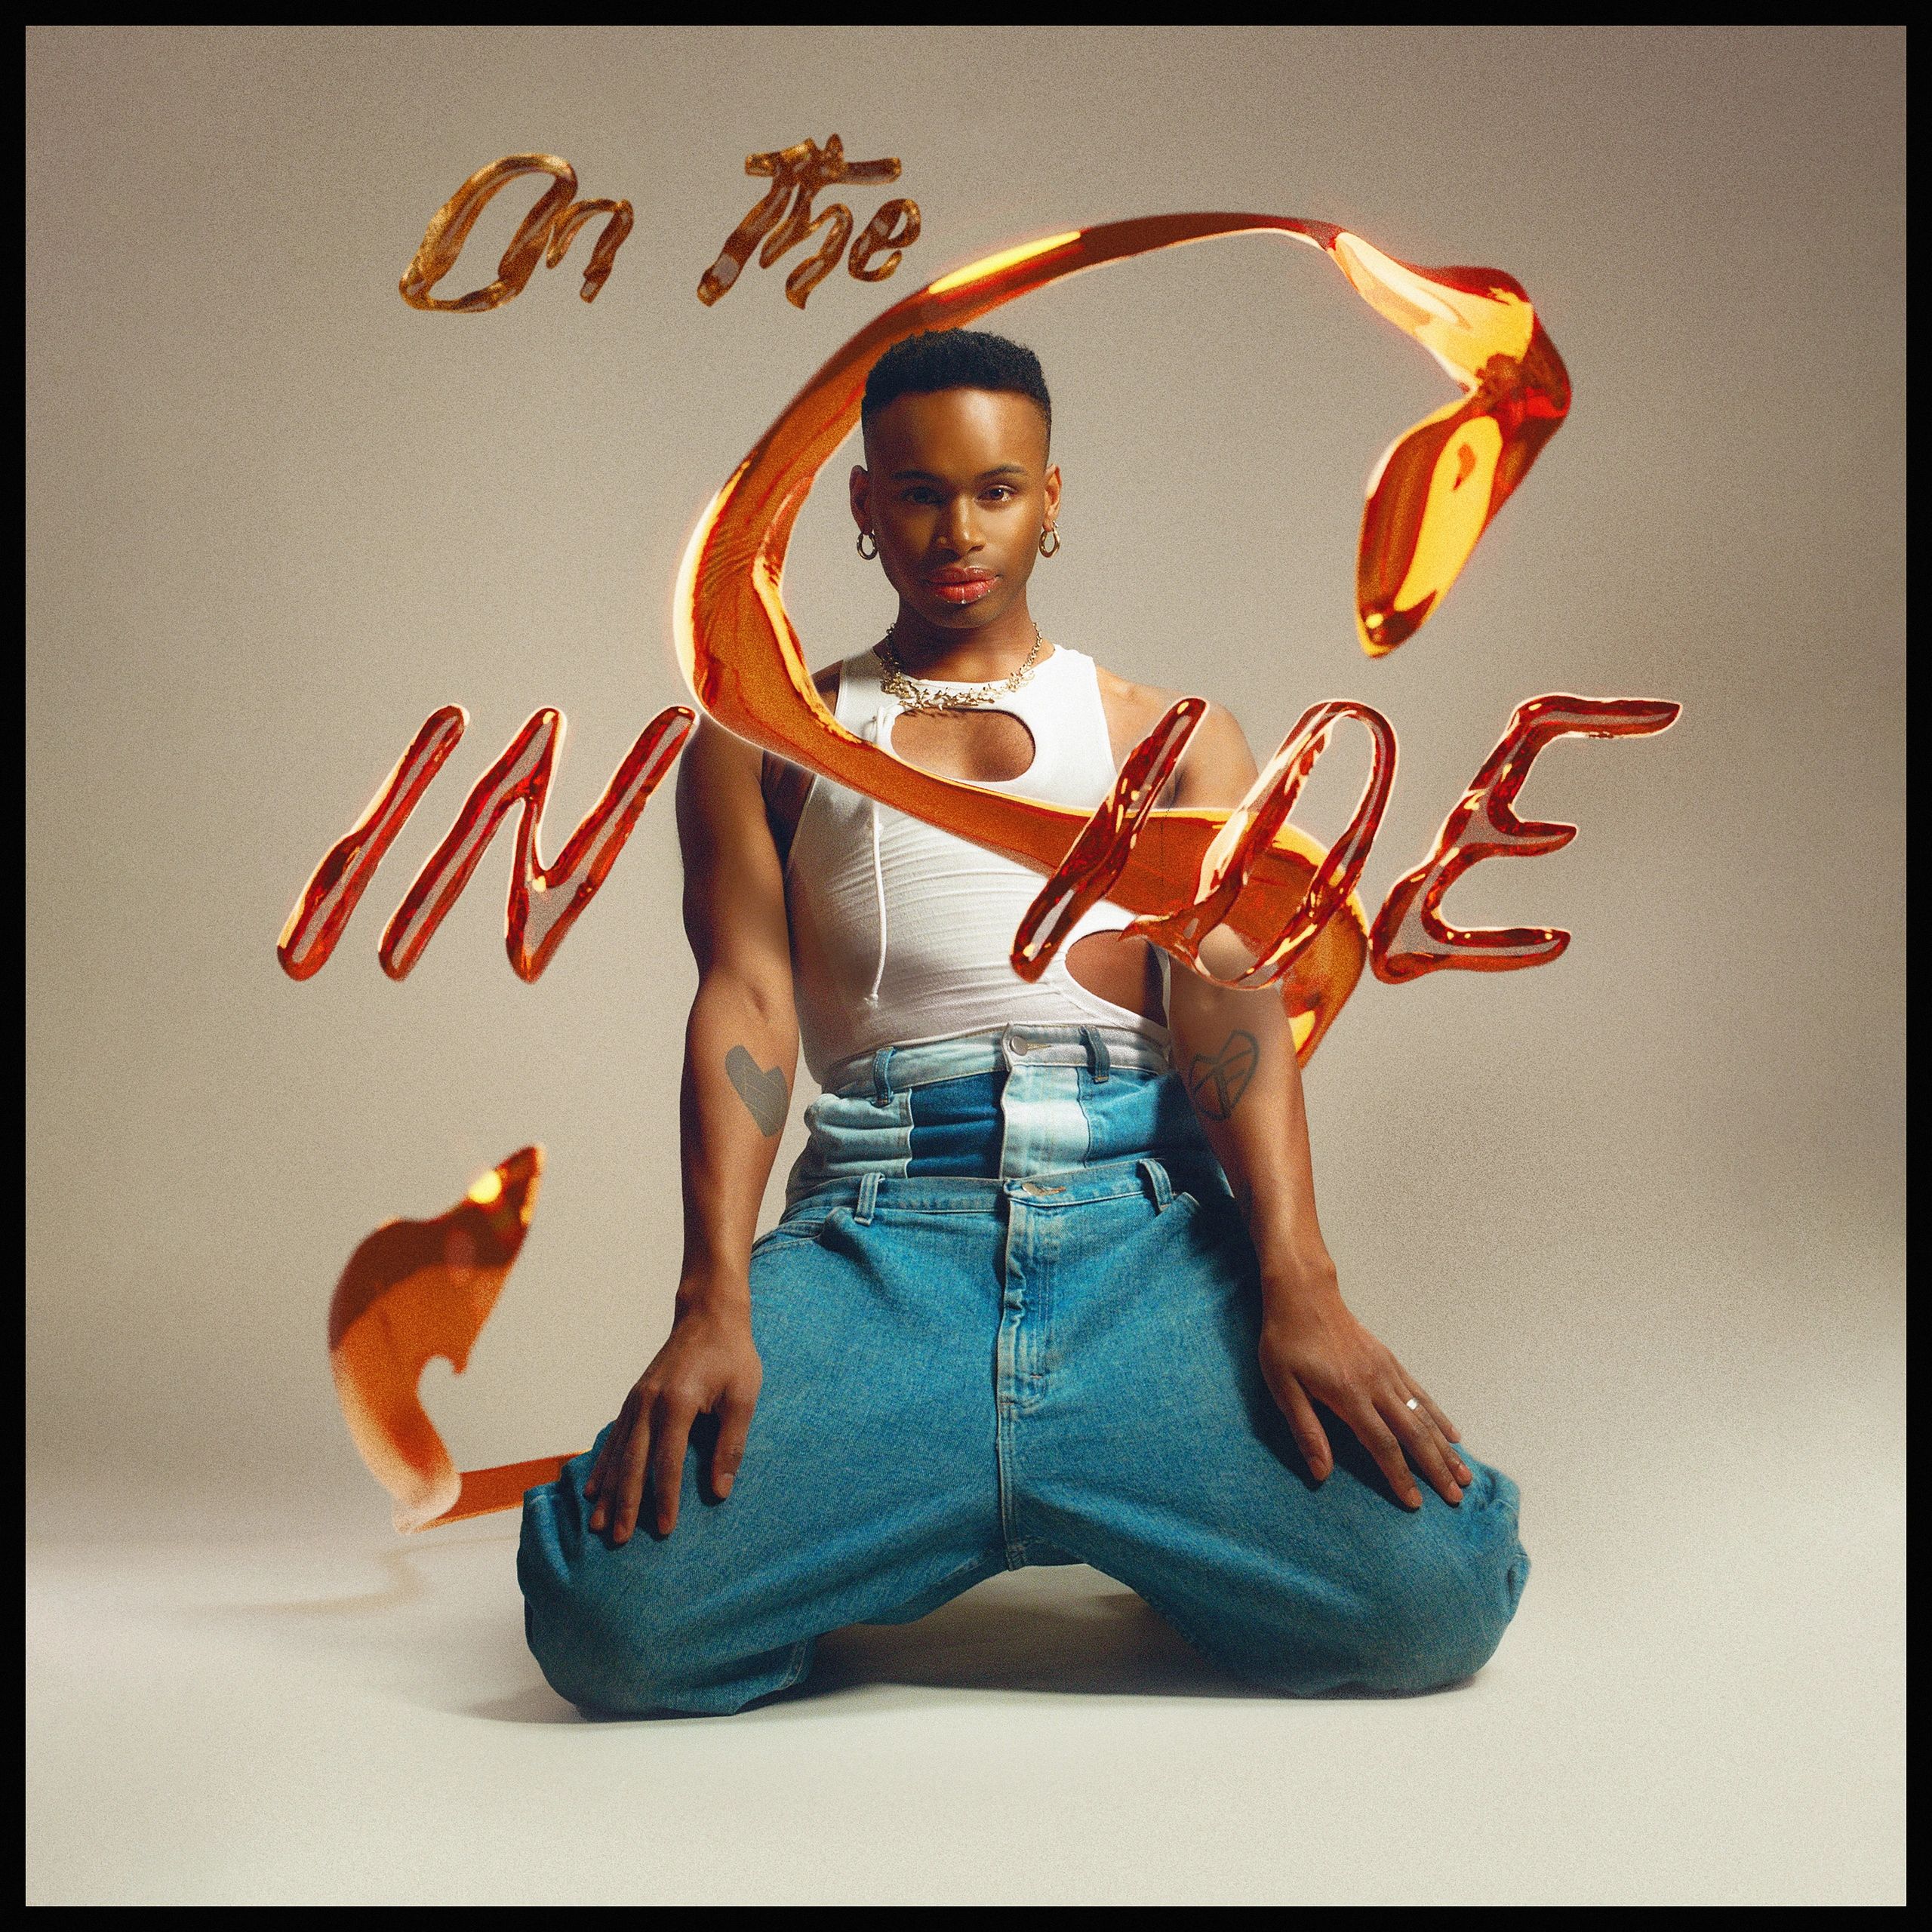 James Baley's 'On The Inside' single cover 